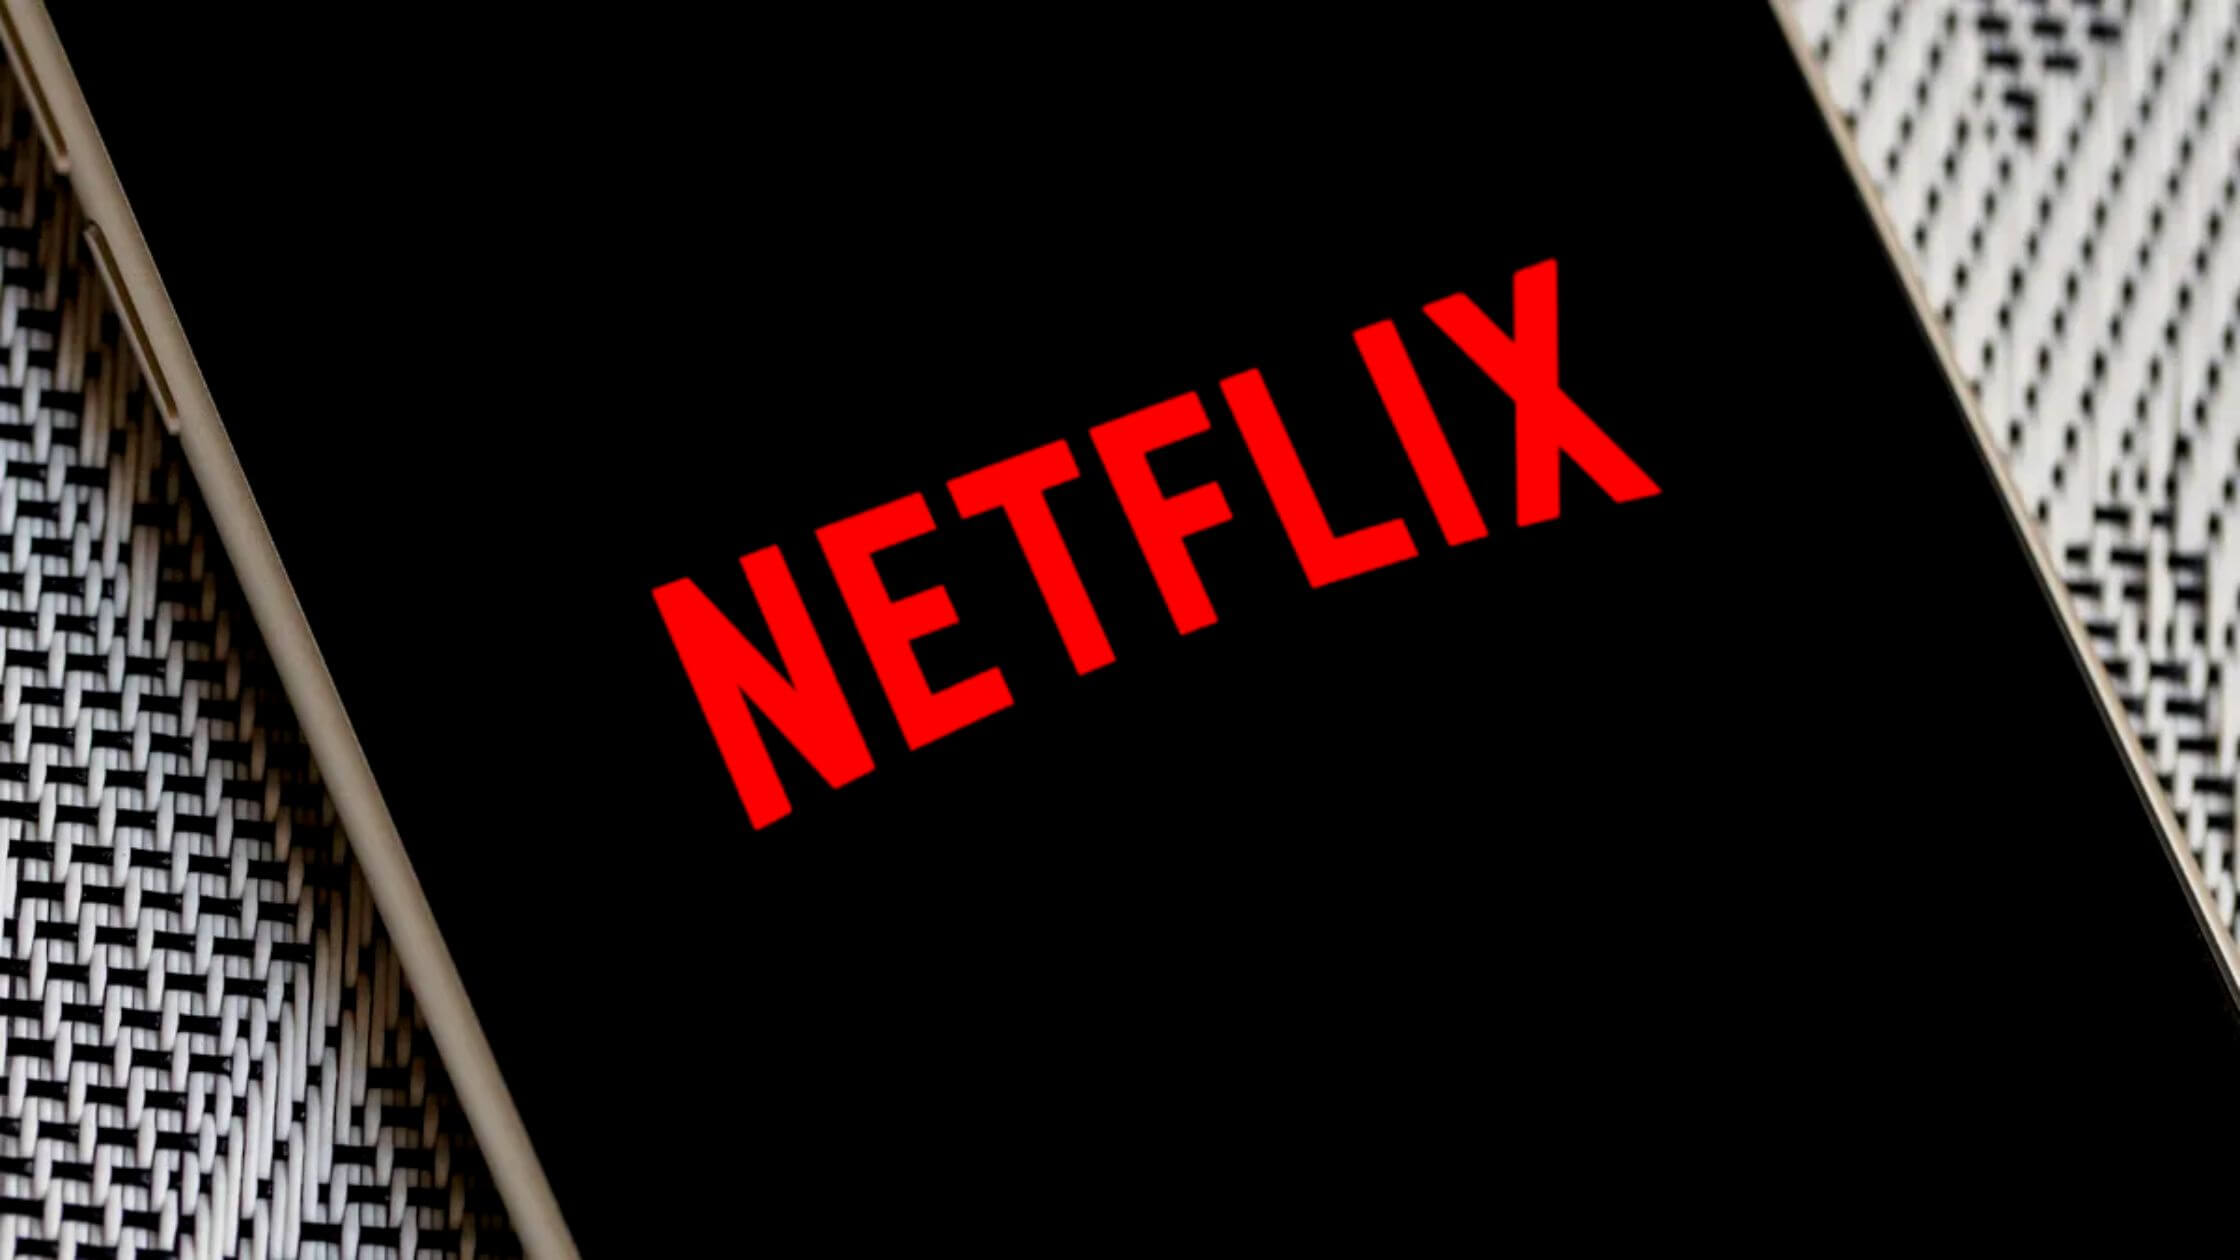 Extra Charges May Be Imposed On Netflix Users Who Share Accounts